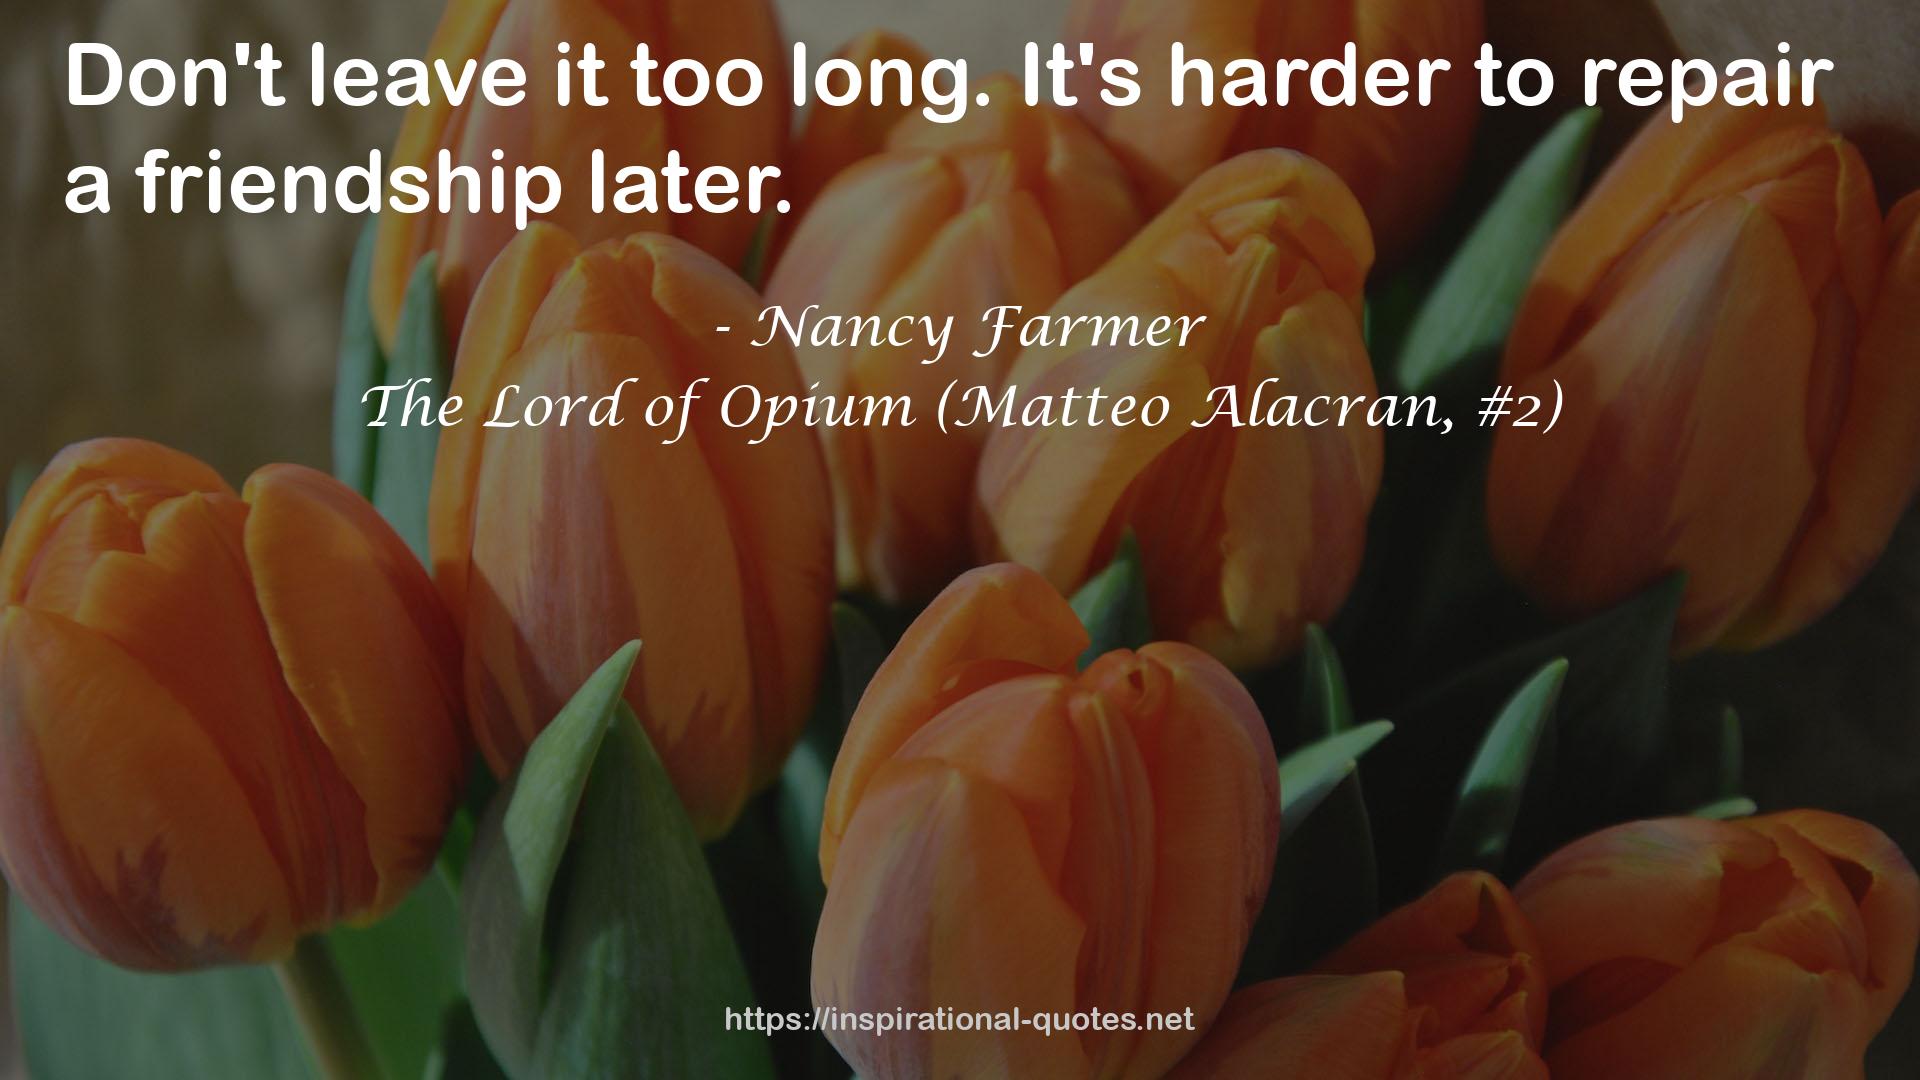 The Lord of Opium (Matteo Alacran, #2) QUOTES